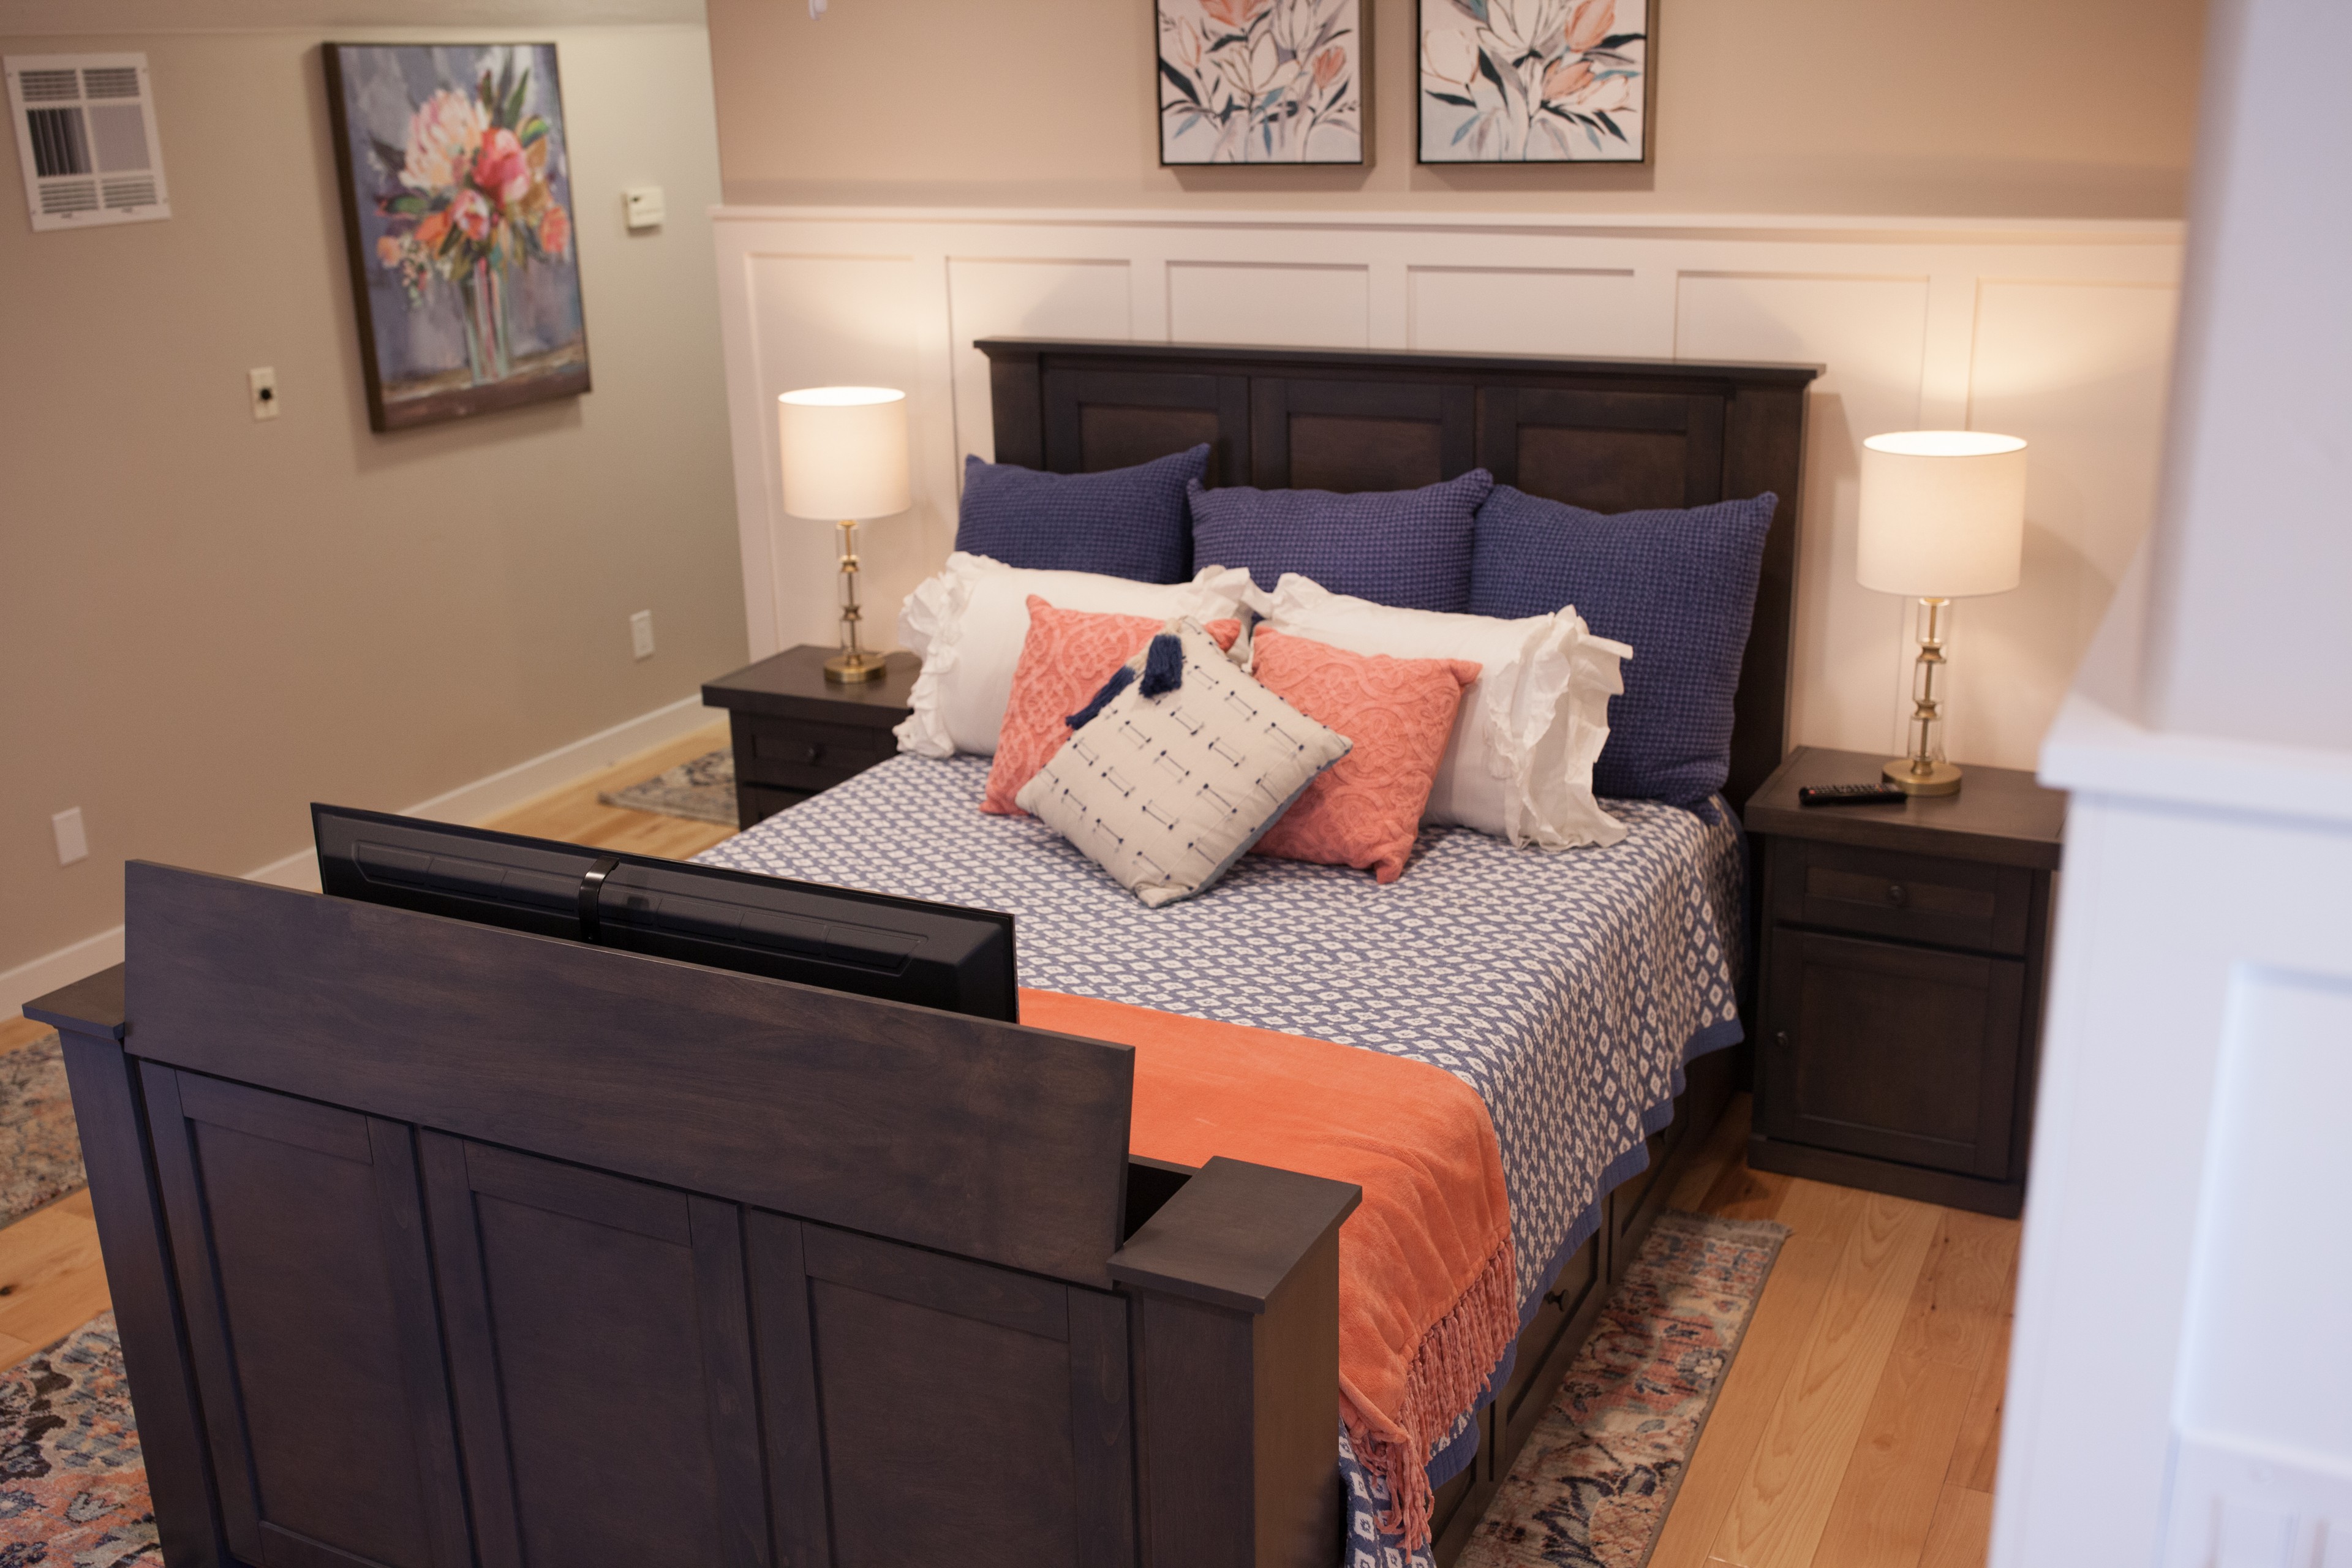 Tv Lift In The Footboard - Photos & Ideas | Houzz